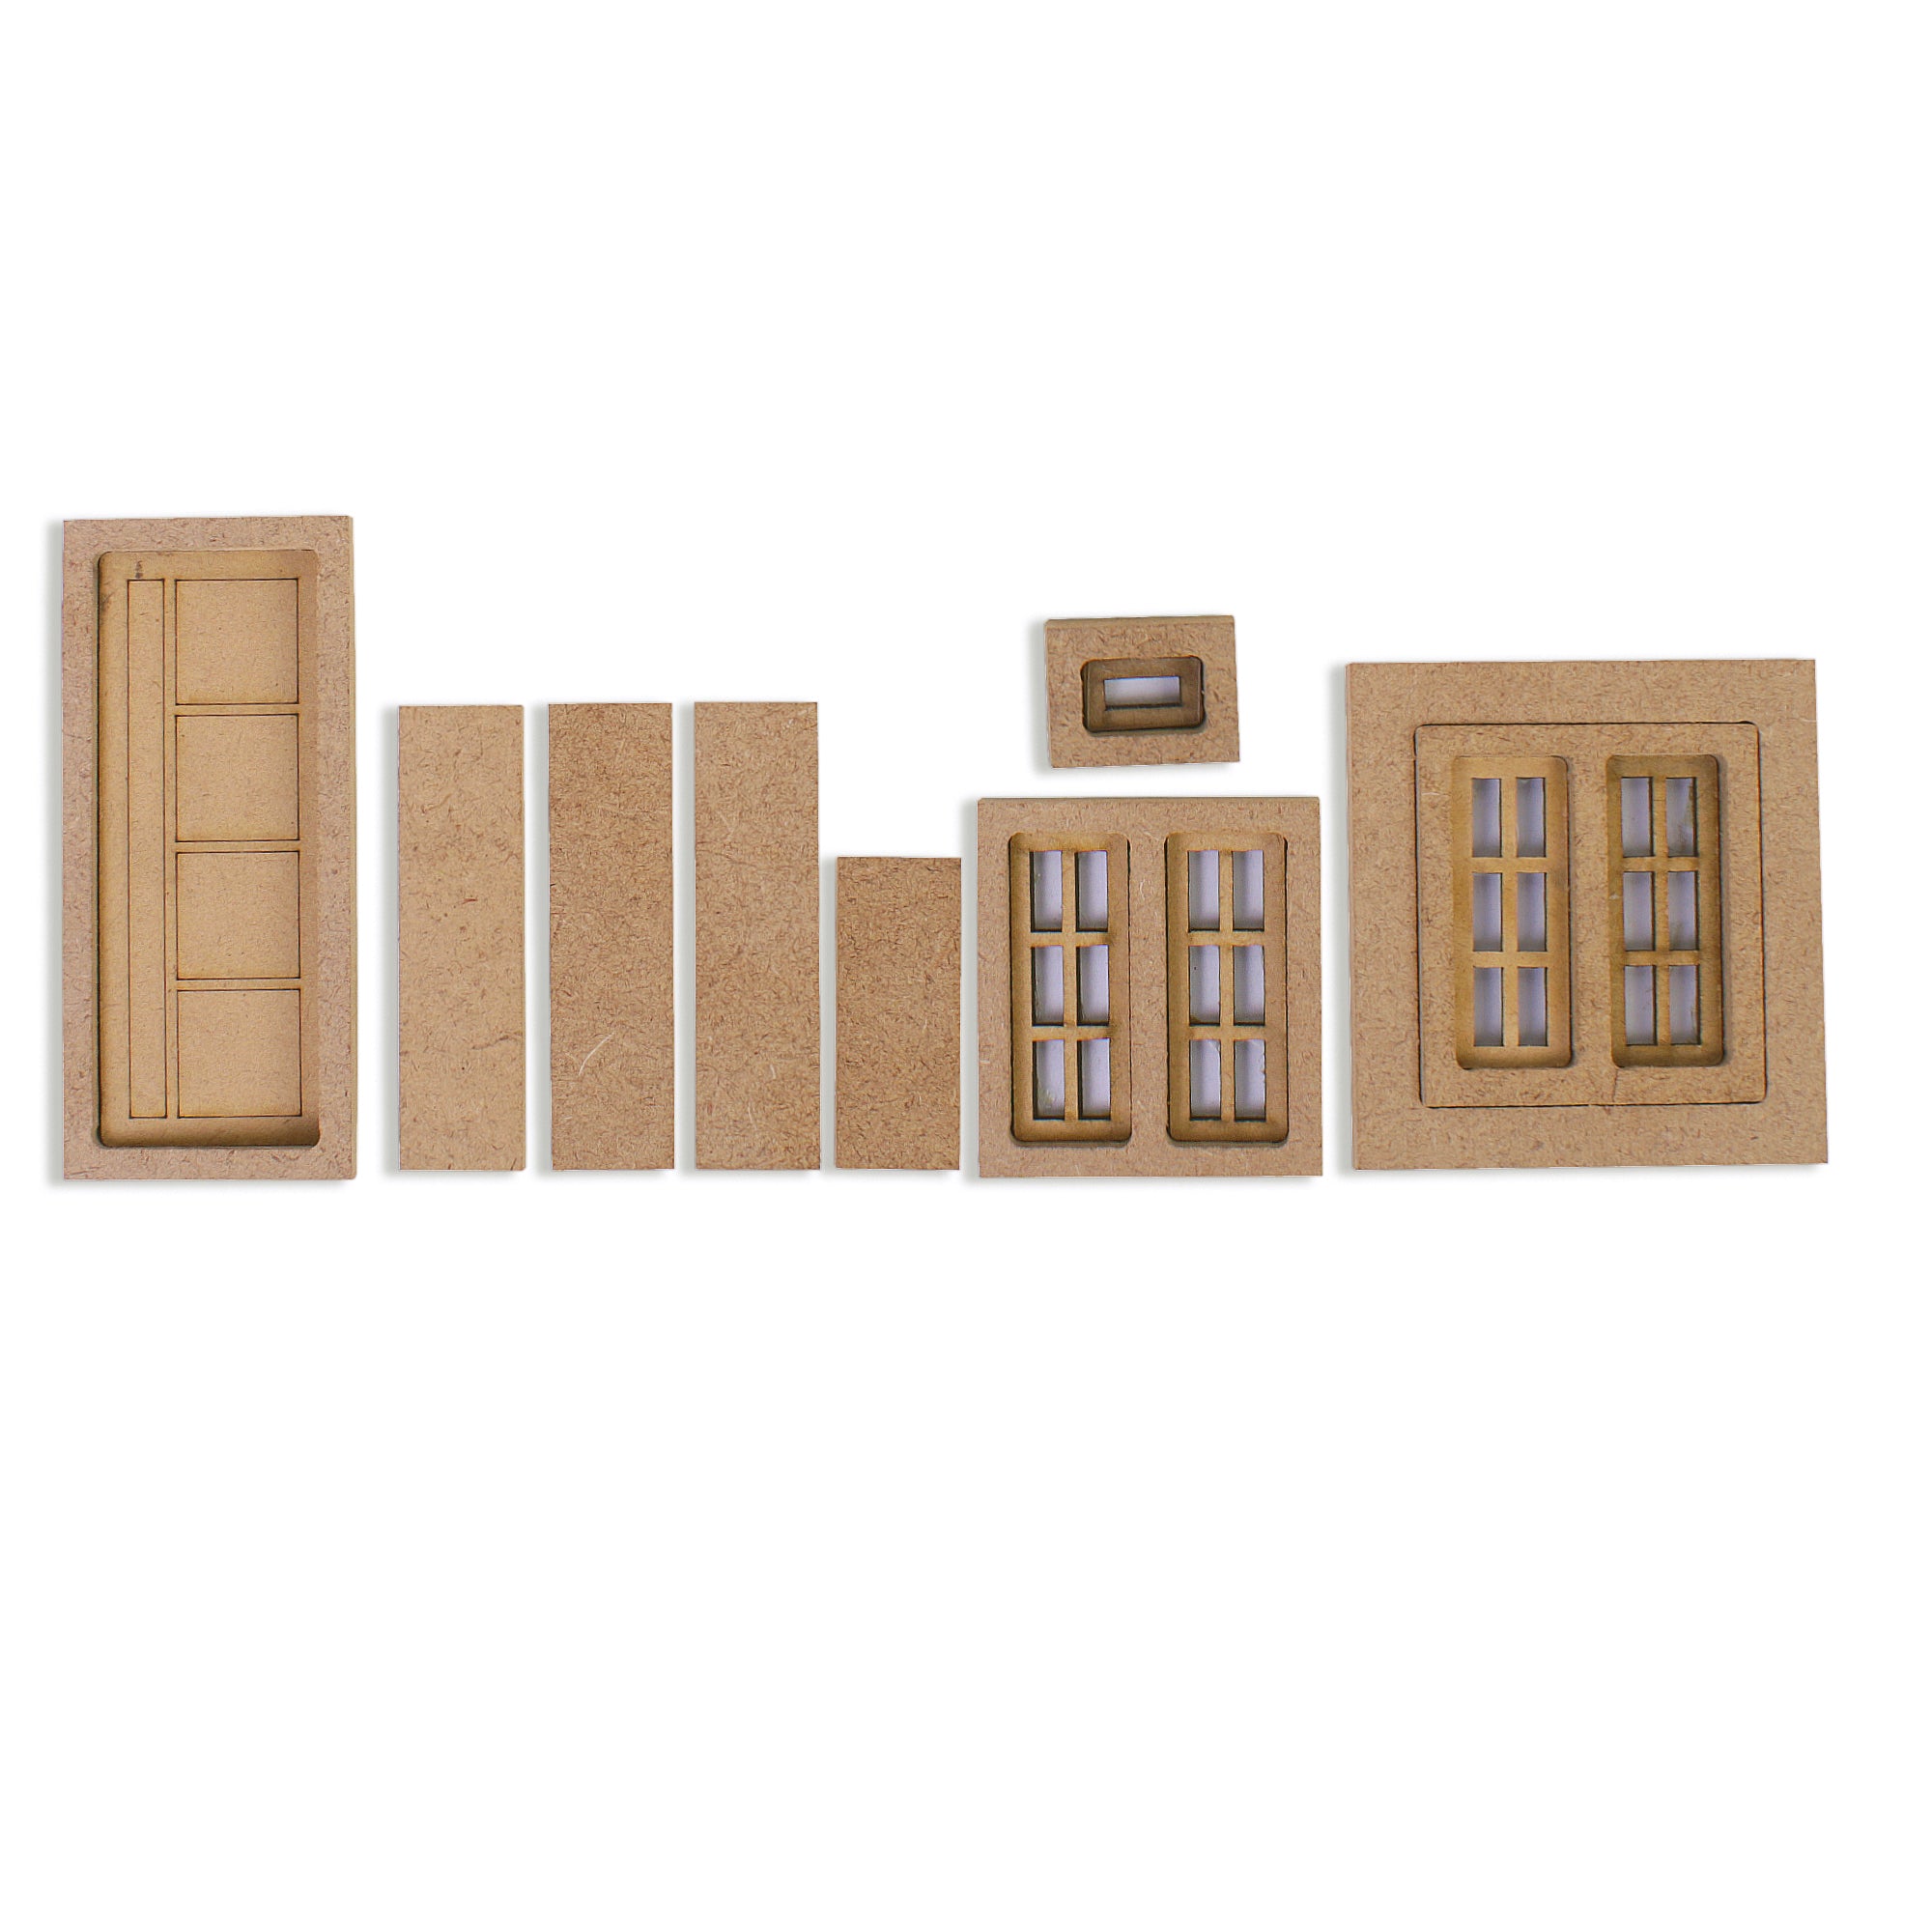 DIY Build a Home Kit | Miniature House All in One Craft Box